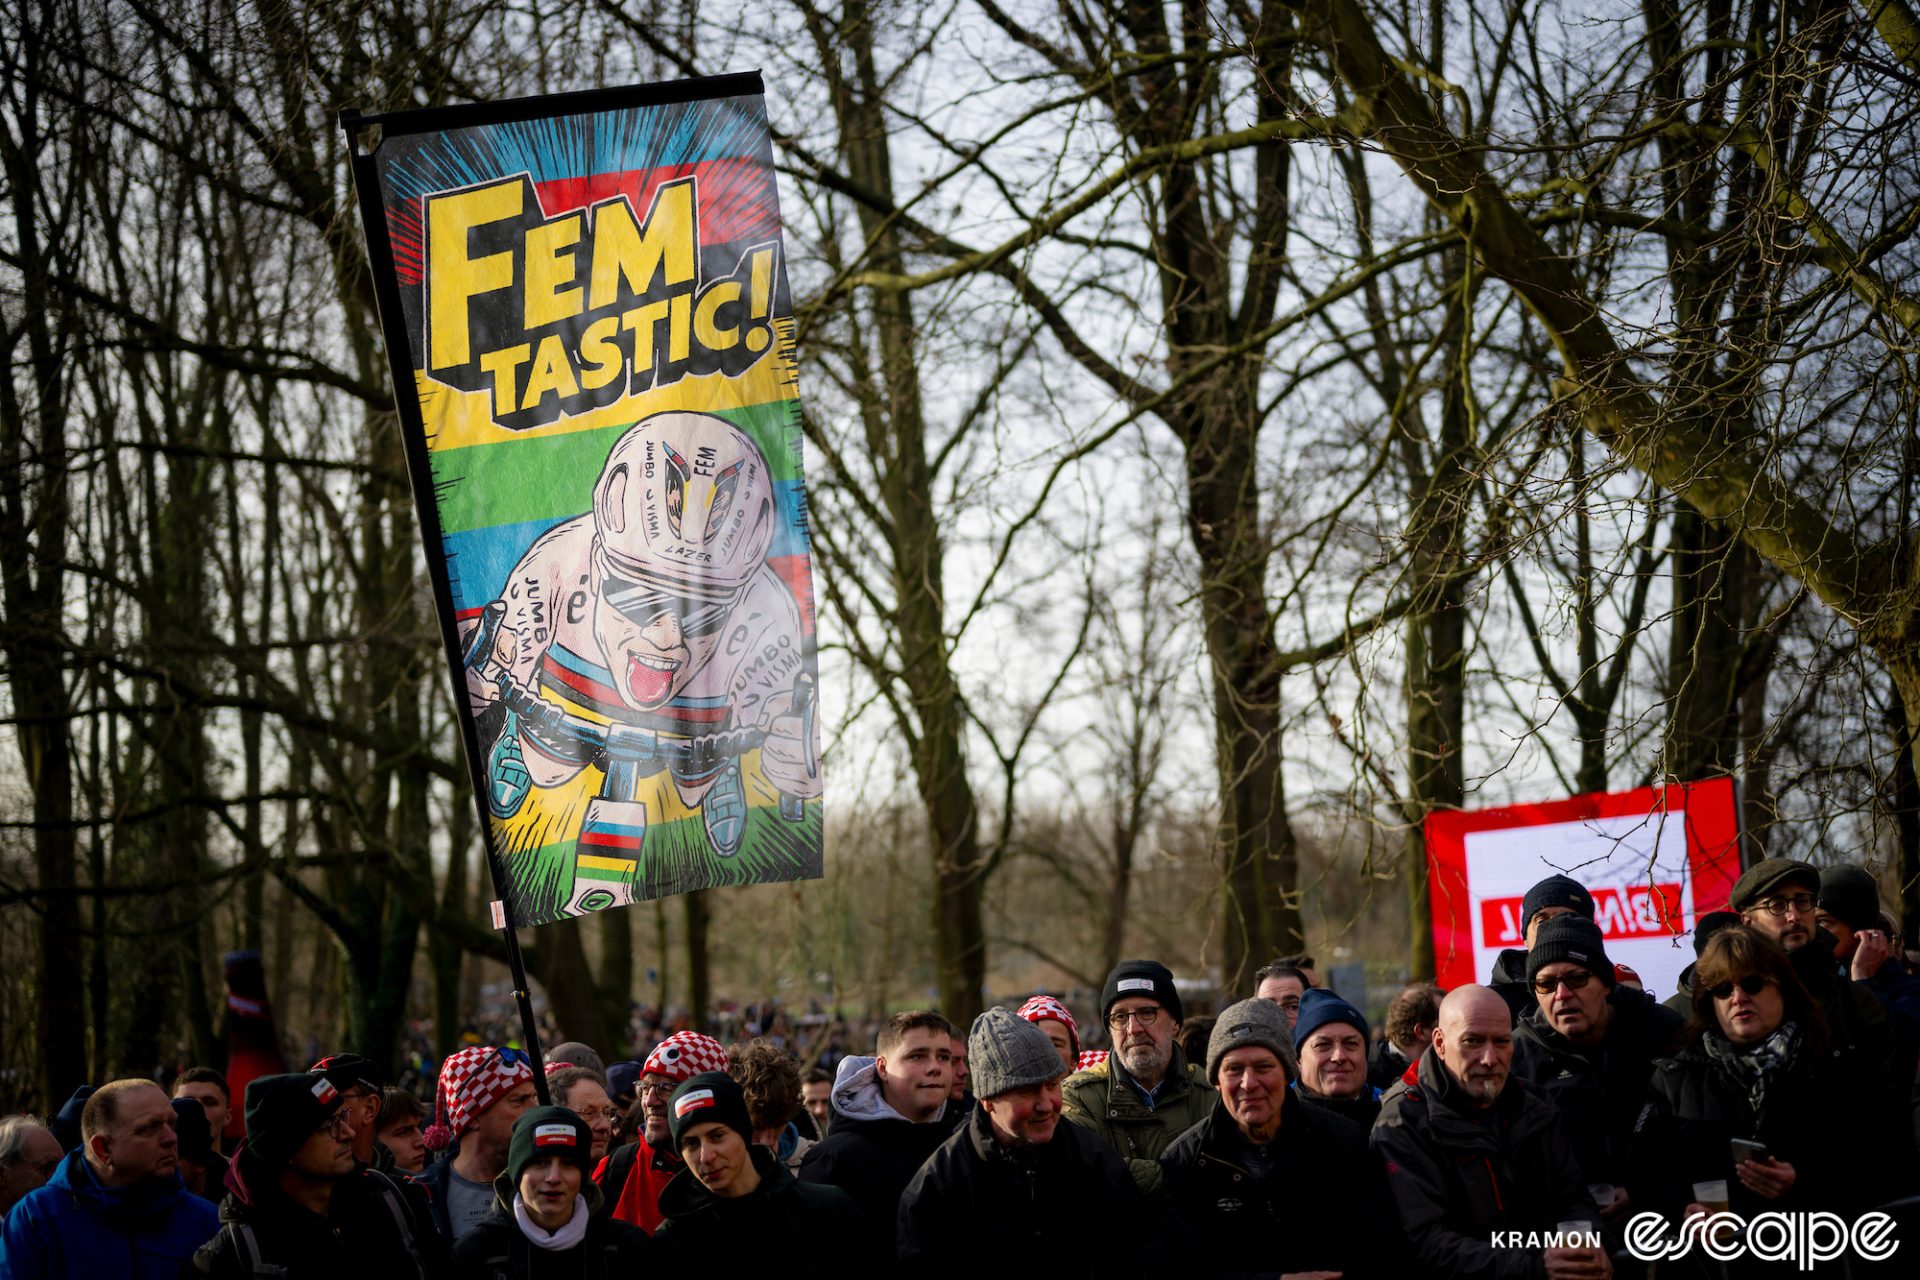 Fans at Gavere. ONe holds a large banner aloft that reads "Femtastic" and shows a cartoon Van Empel riding her bike in the superman position (legs out behind) with her tongue out.